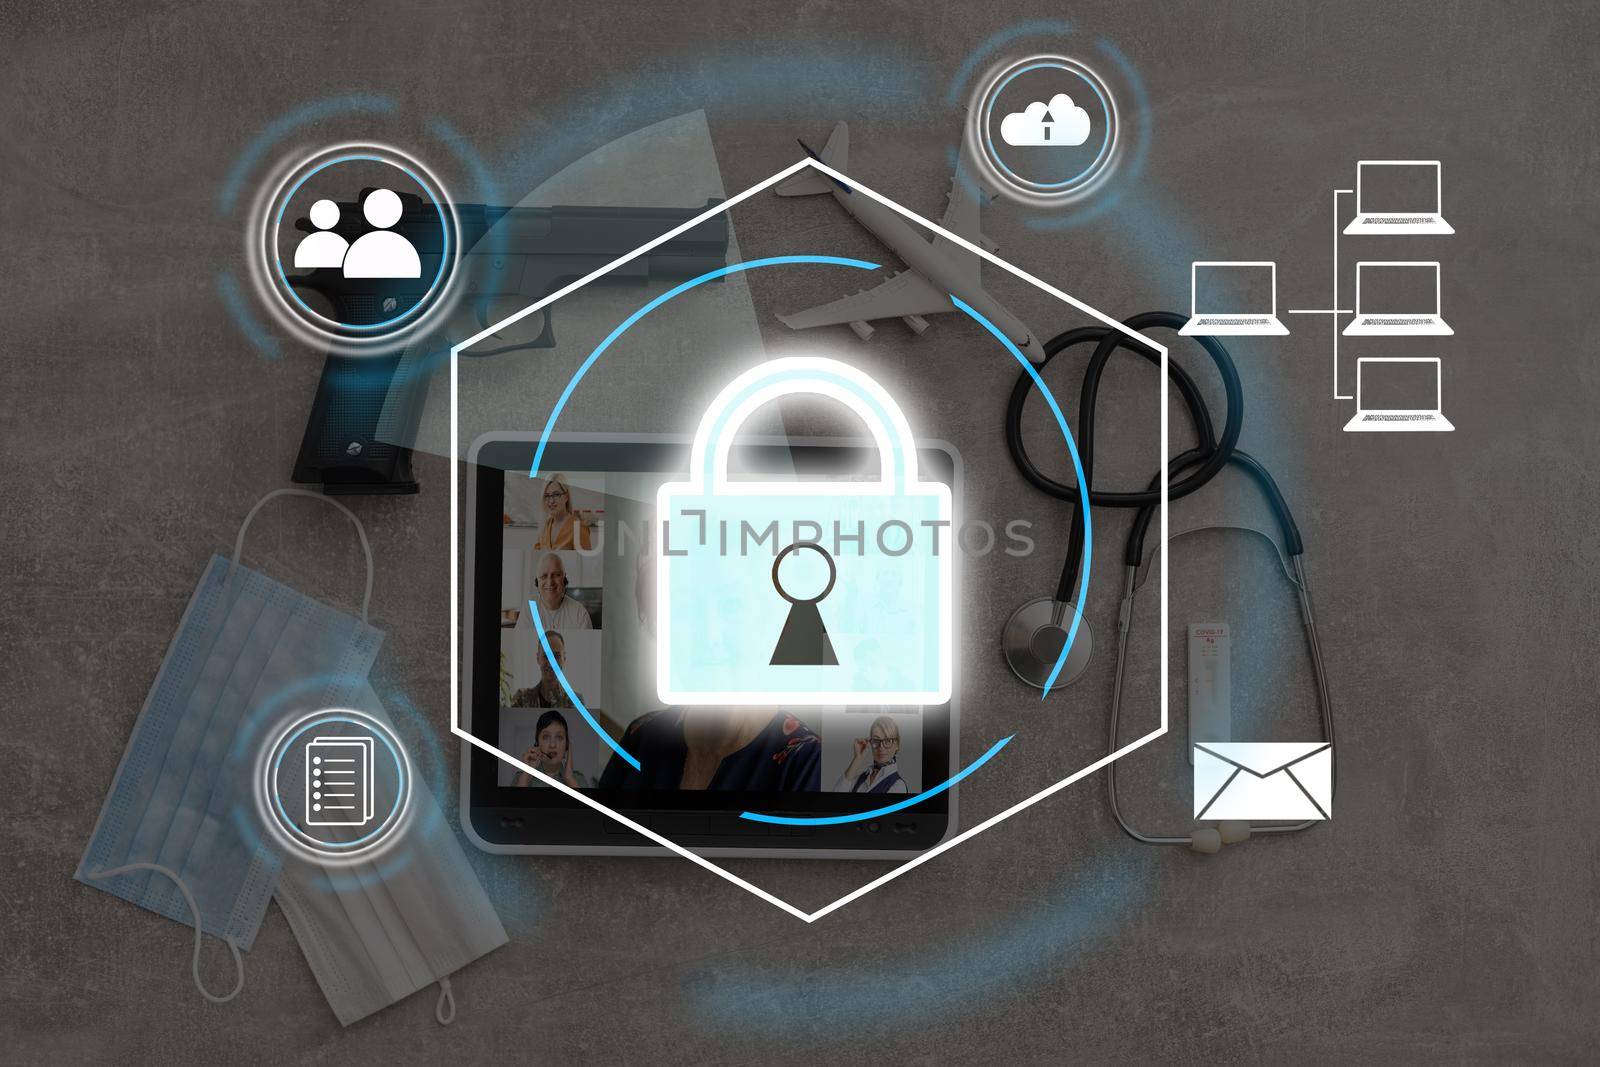 Digital padlock icon, cyber security network and data protection technology on virtual interface screen. Online internet authorized access against cyber attack.and business data privacy concept.